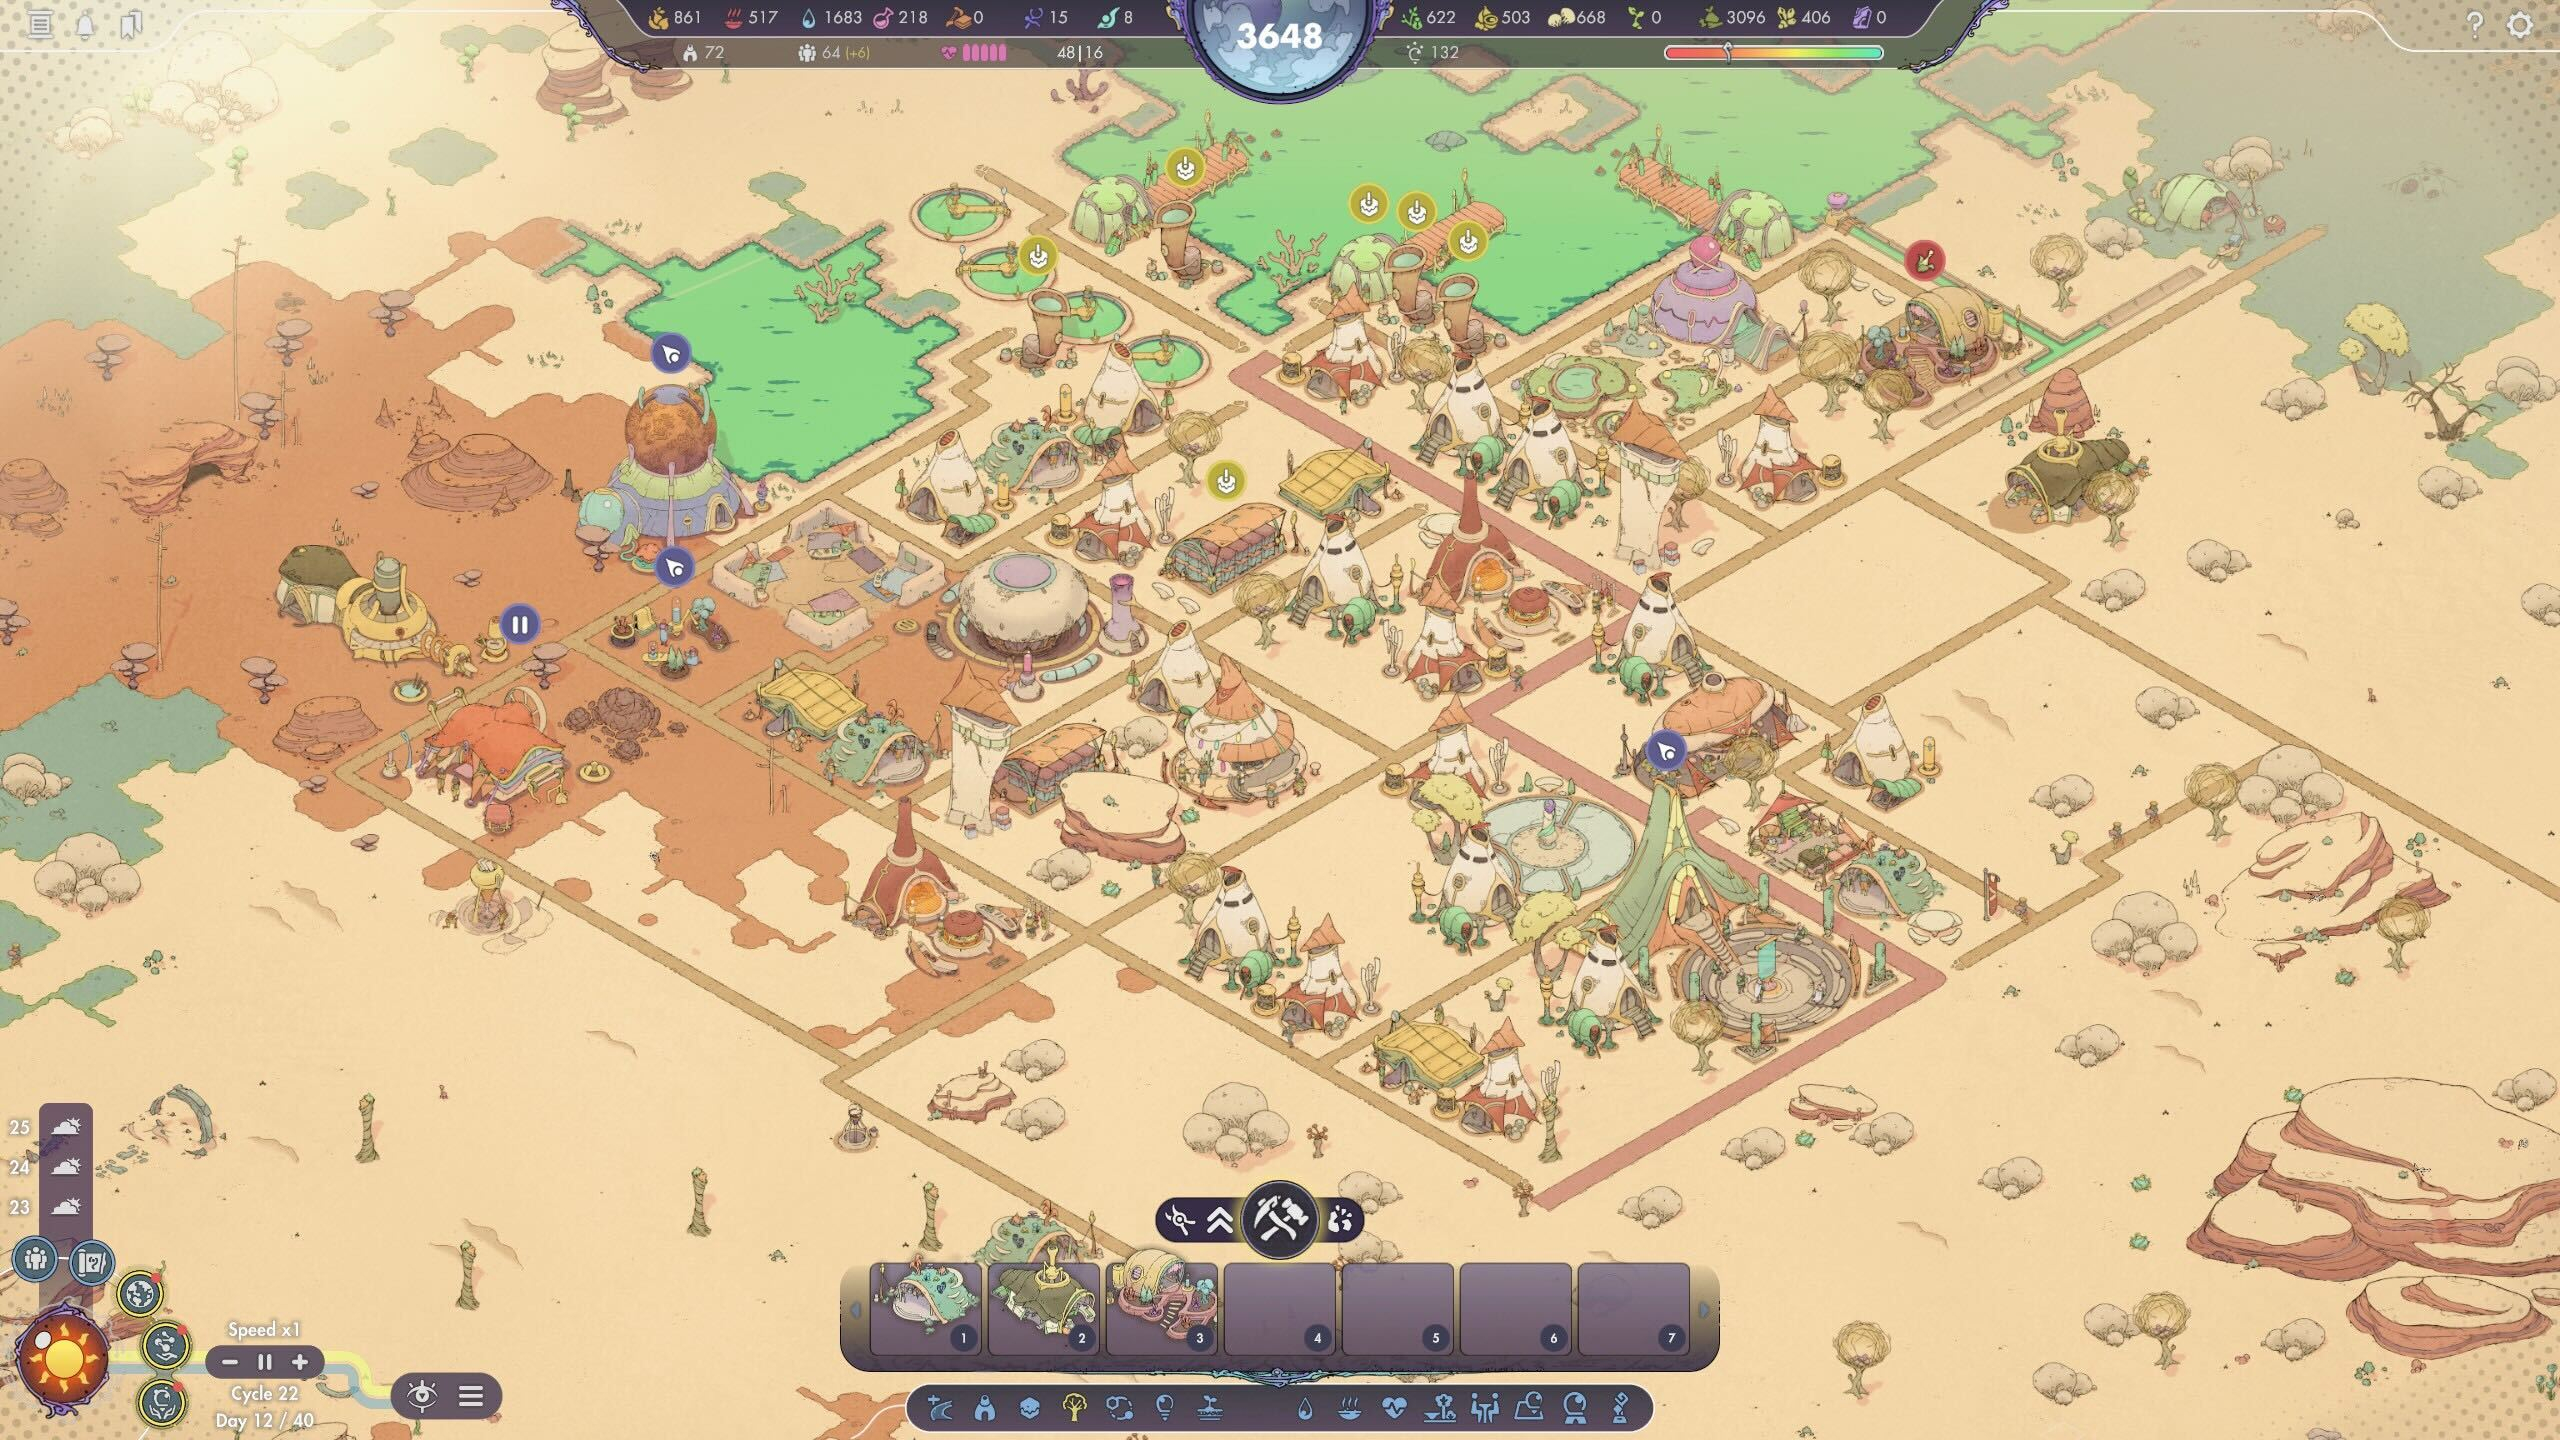  Synergy's solarpunk aesthetic and harsh resource management makes it one stellar city builder  